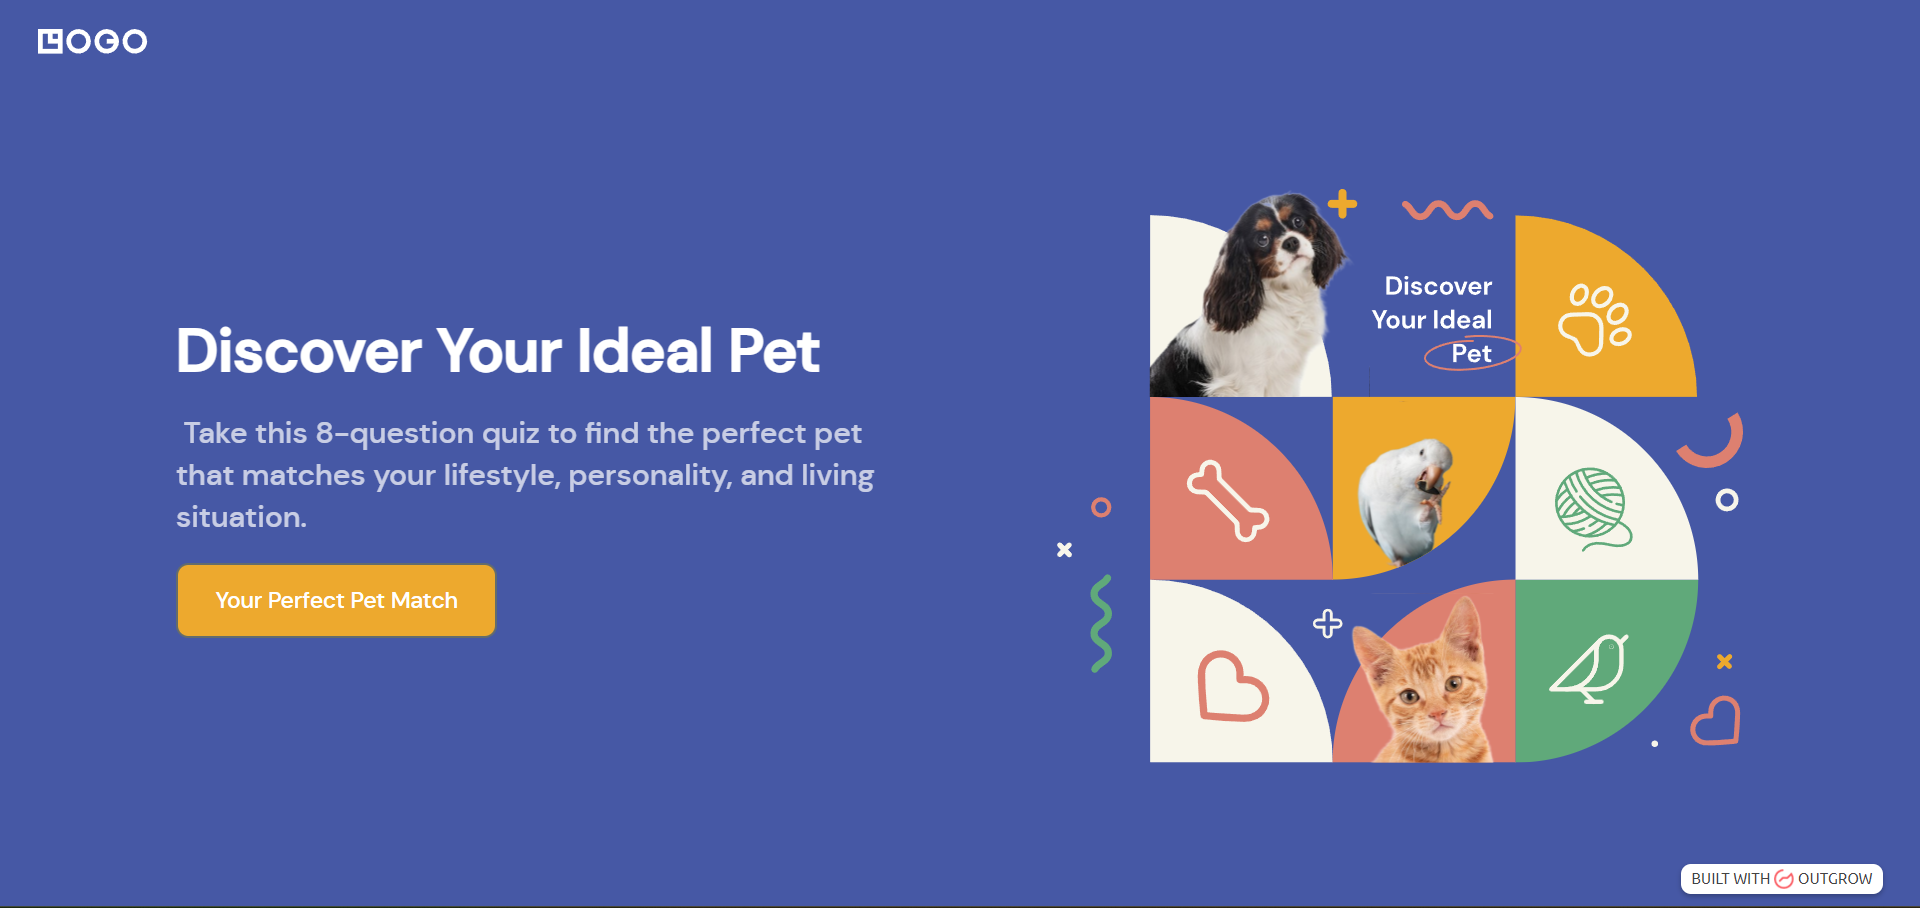  Discover Your Ideal Pet Quiz 